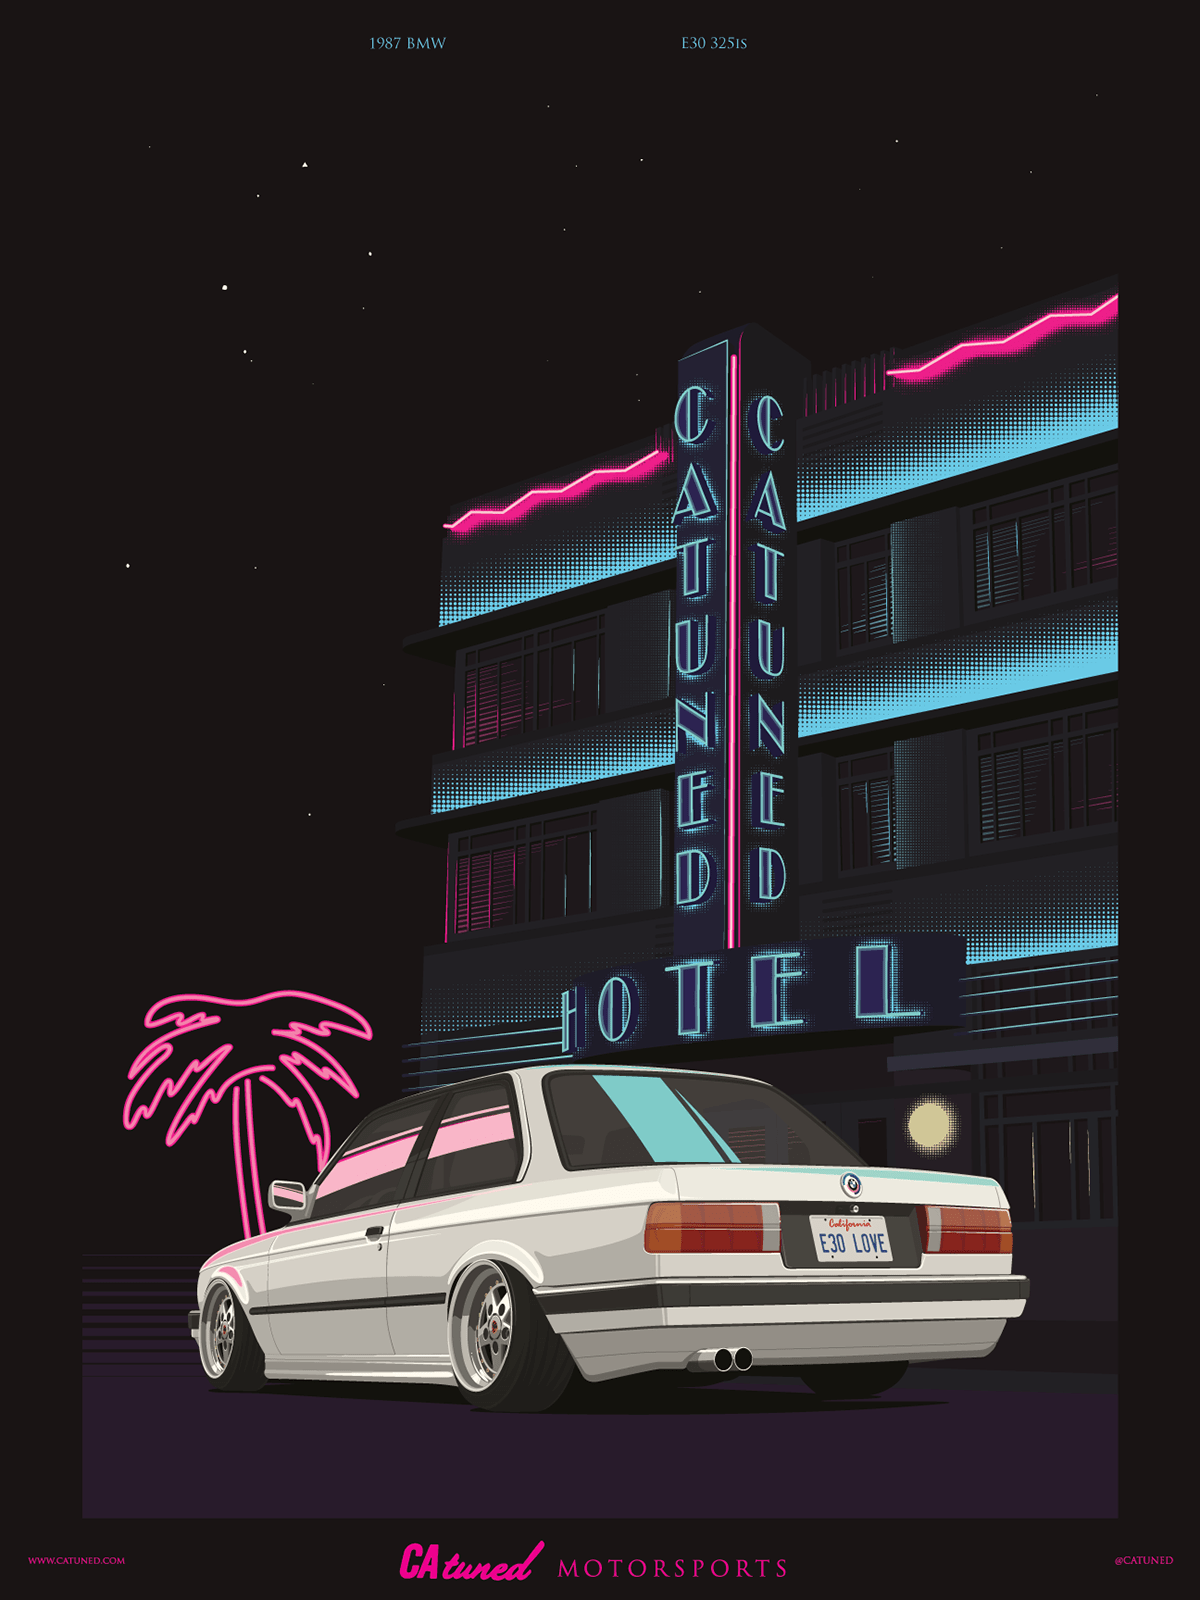 A neon lit poster of an old hotel - BMW